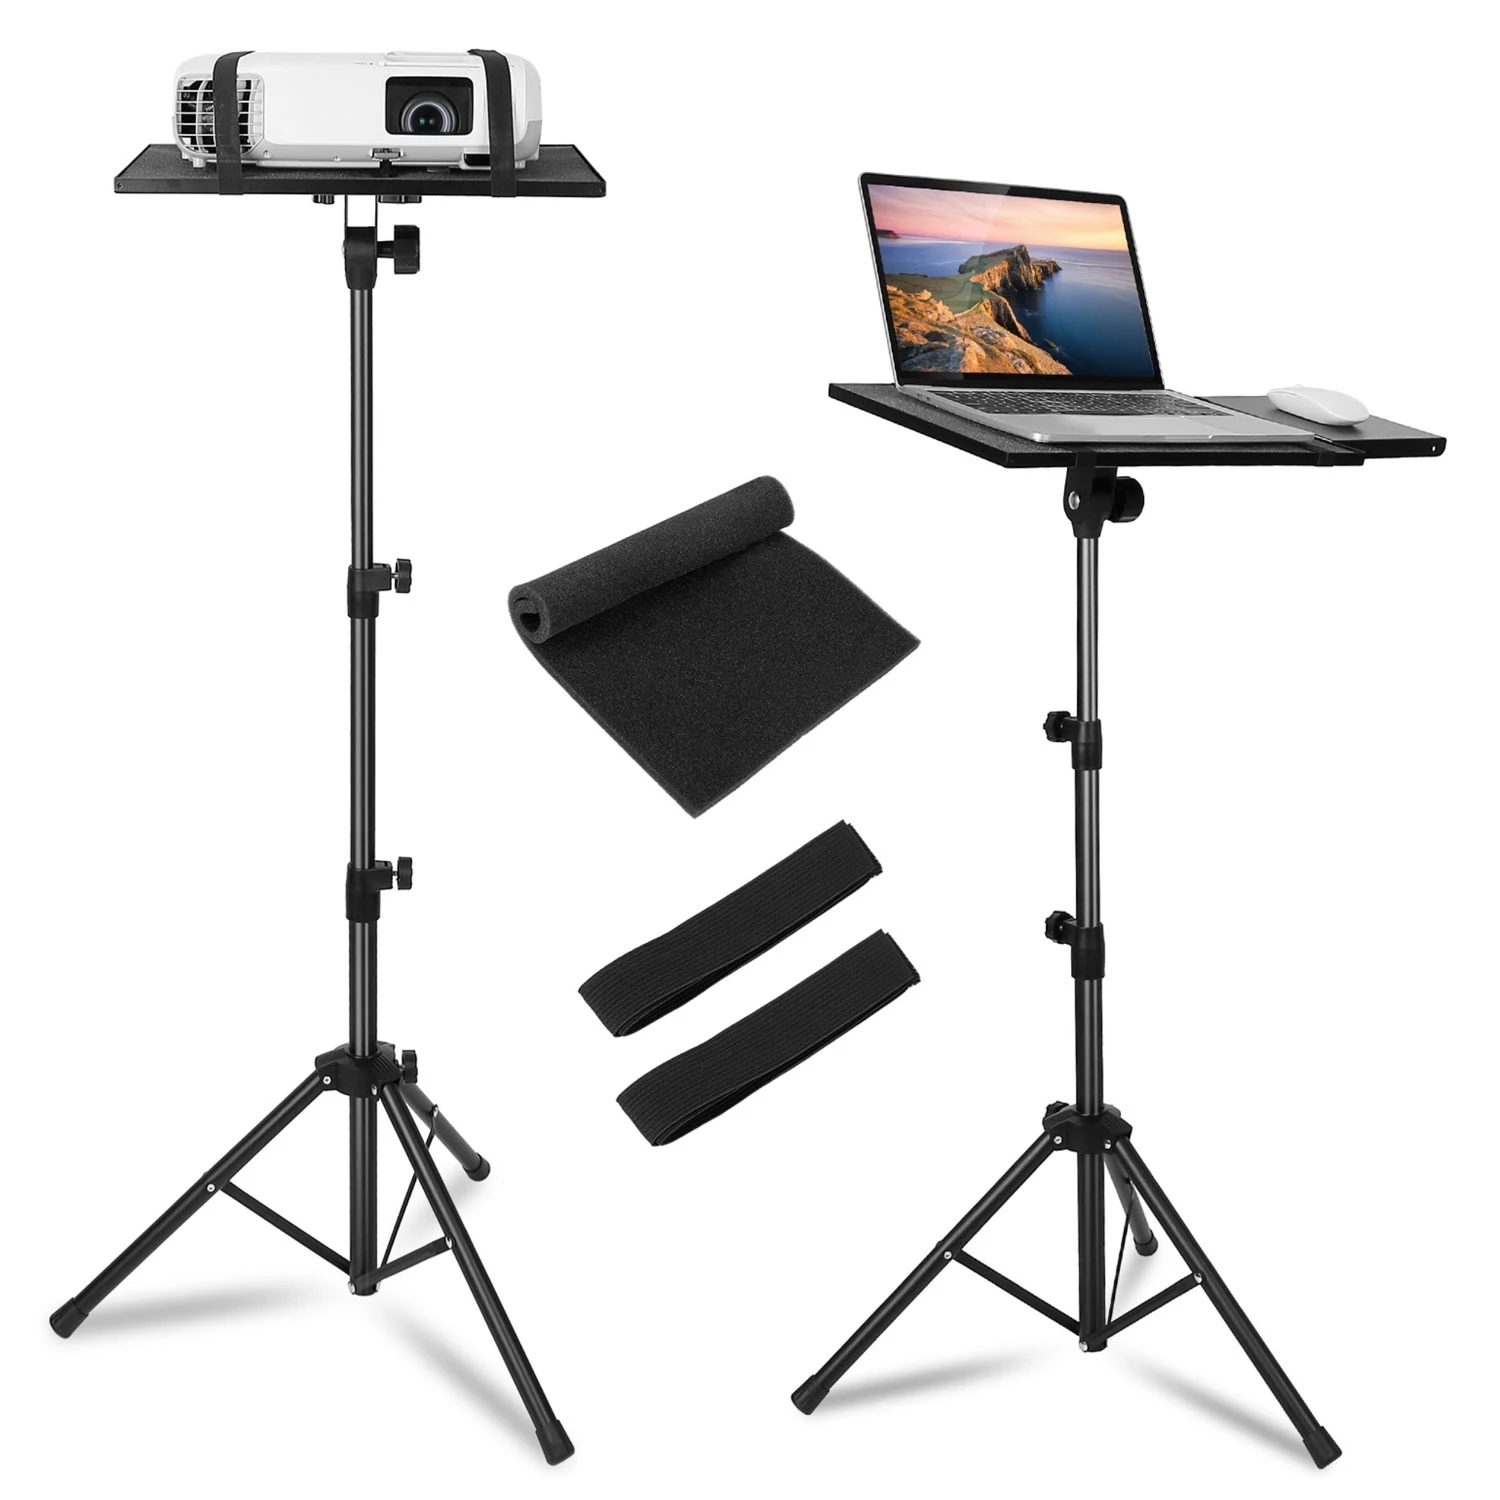 Portable Projector Tripod Stand With Height And Tilt Adjustment For DJ Equipment